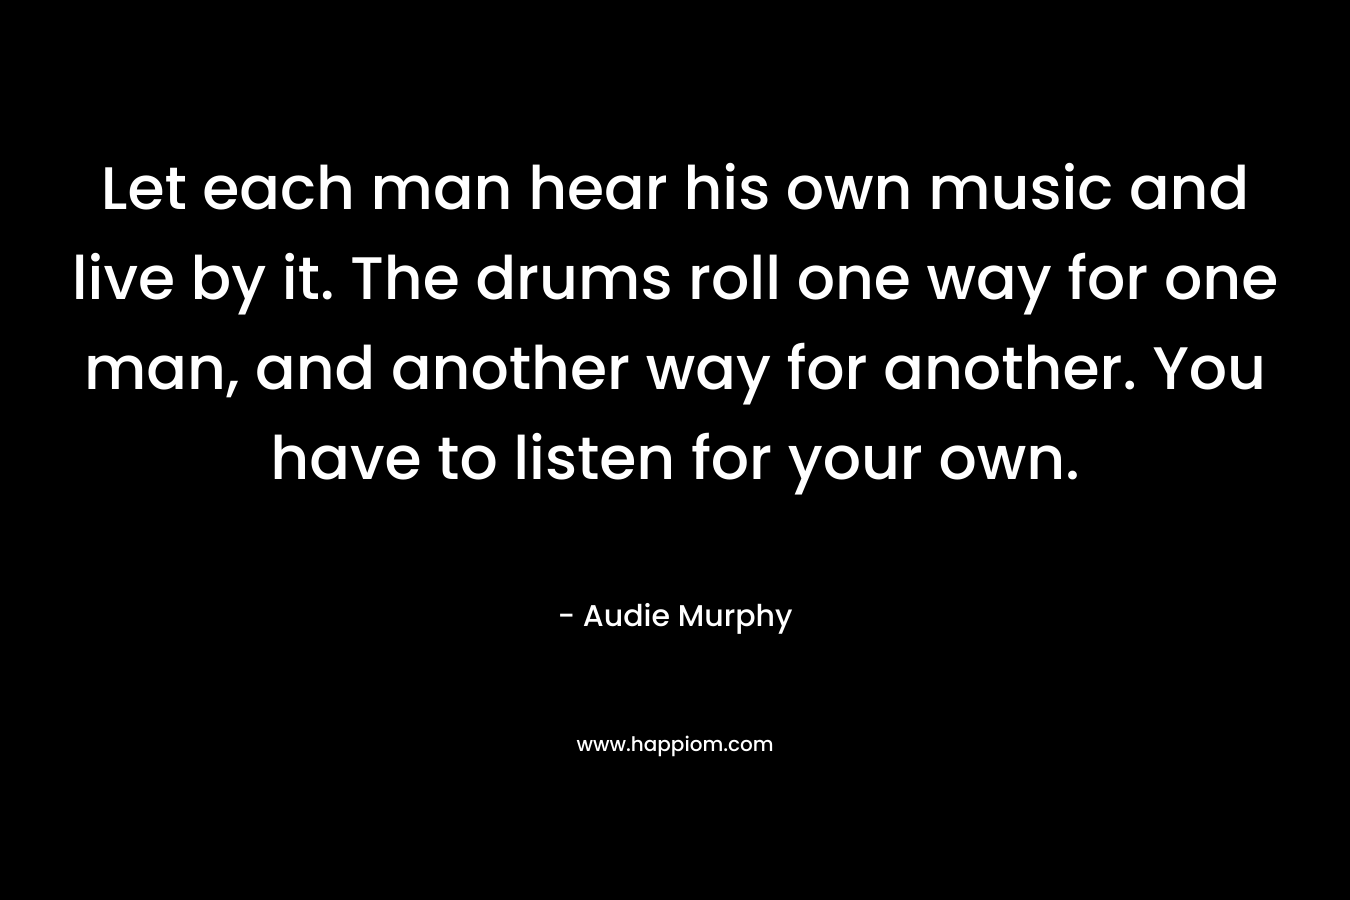 Let each man hear his own music and live by it. The drums roll one way for one man, and another way for another. You have to listen for your own.